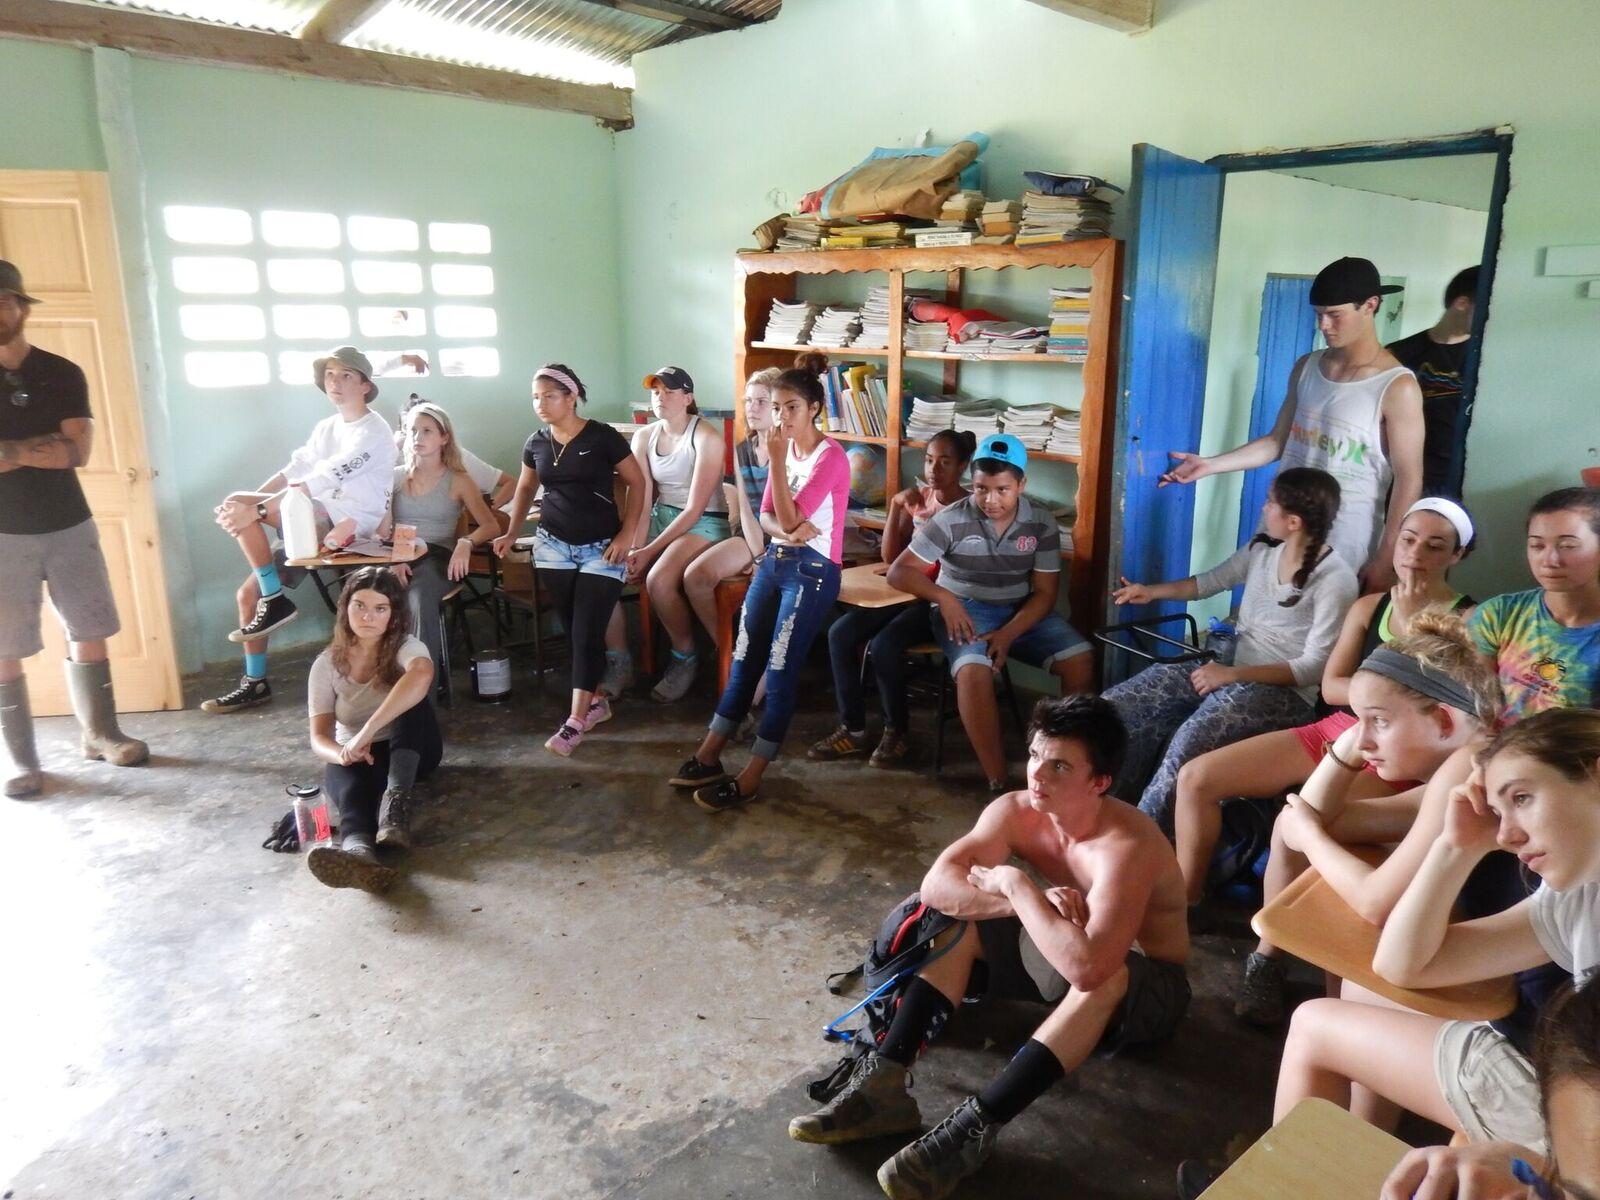 Zadoff and other volunteers visit a school in Panama